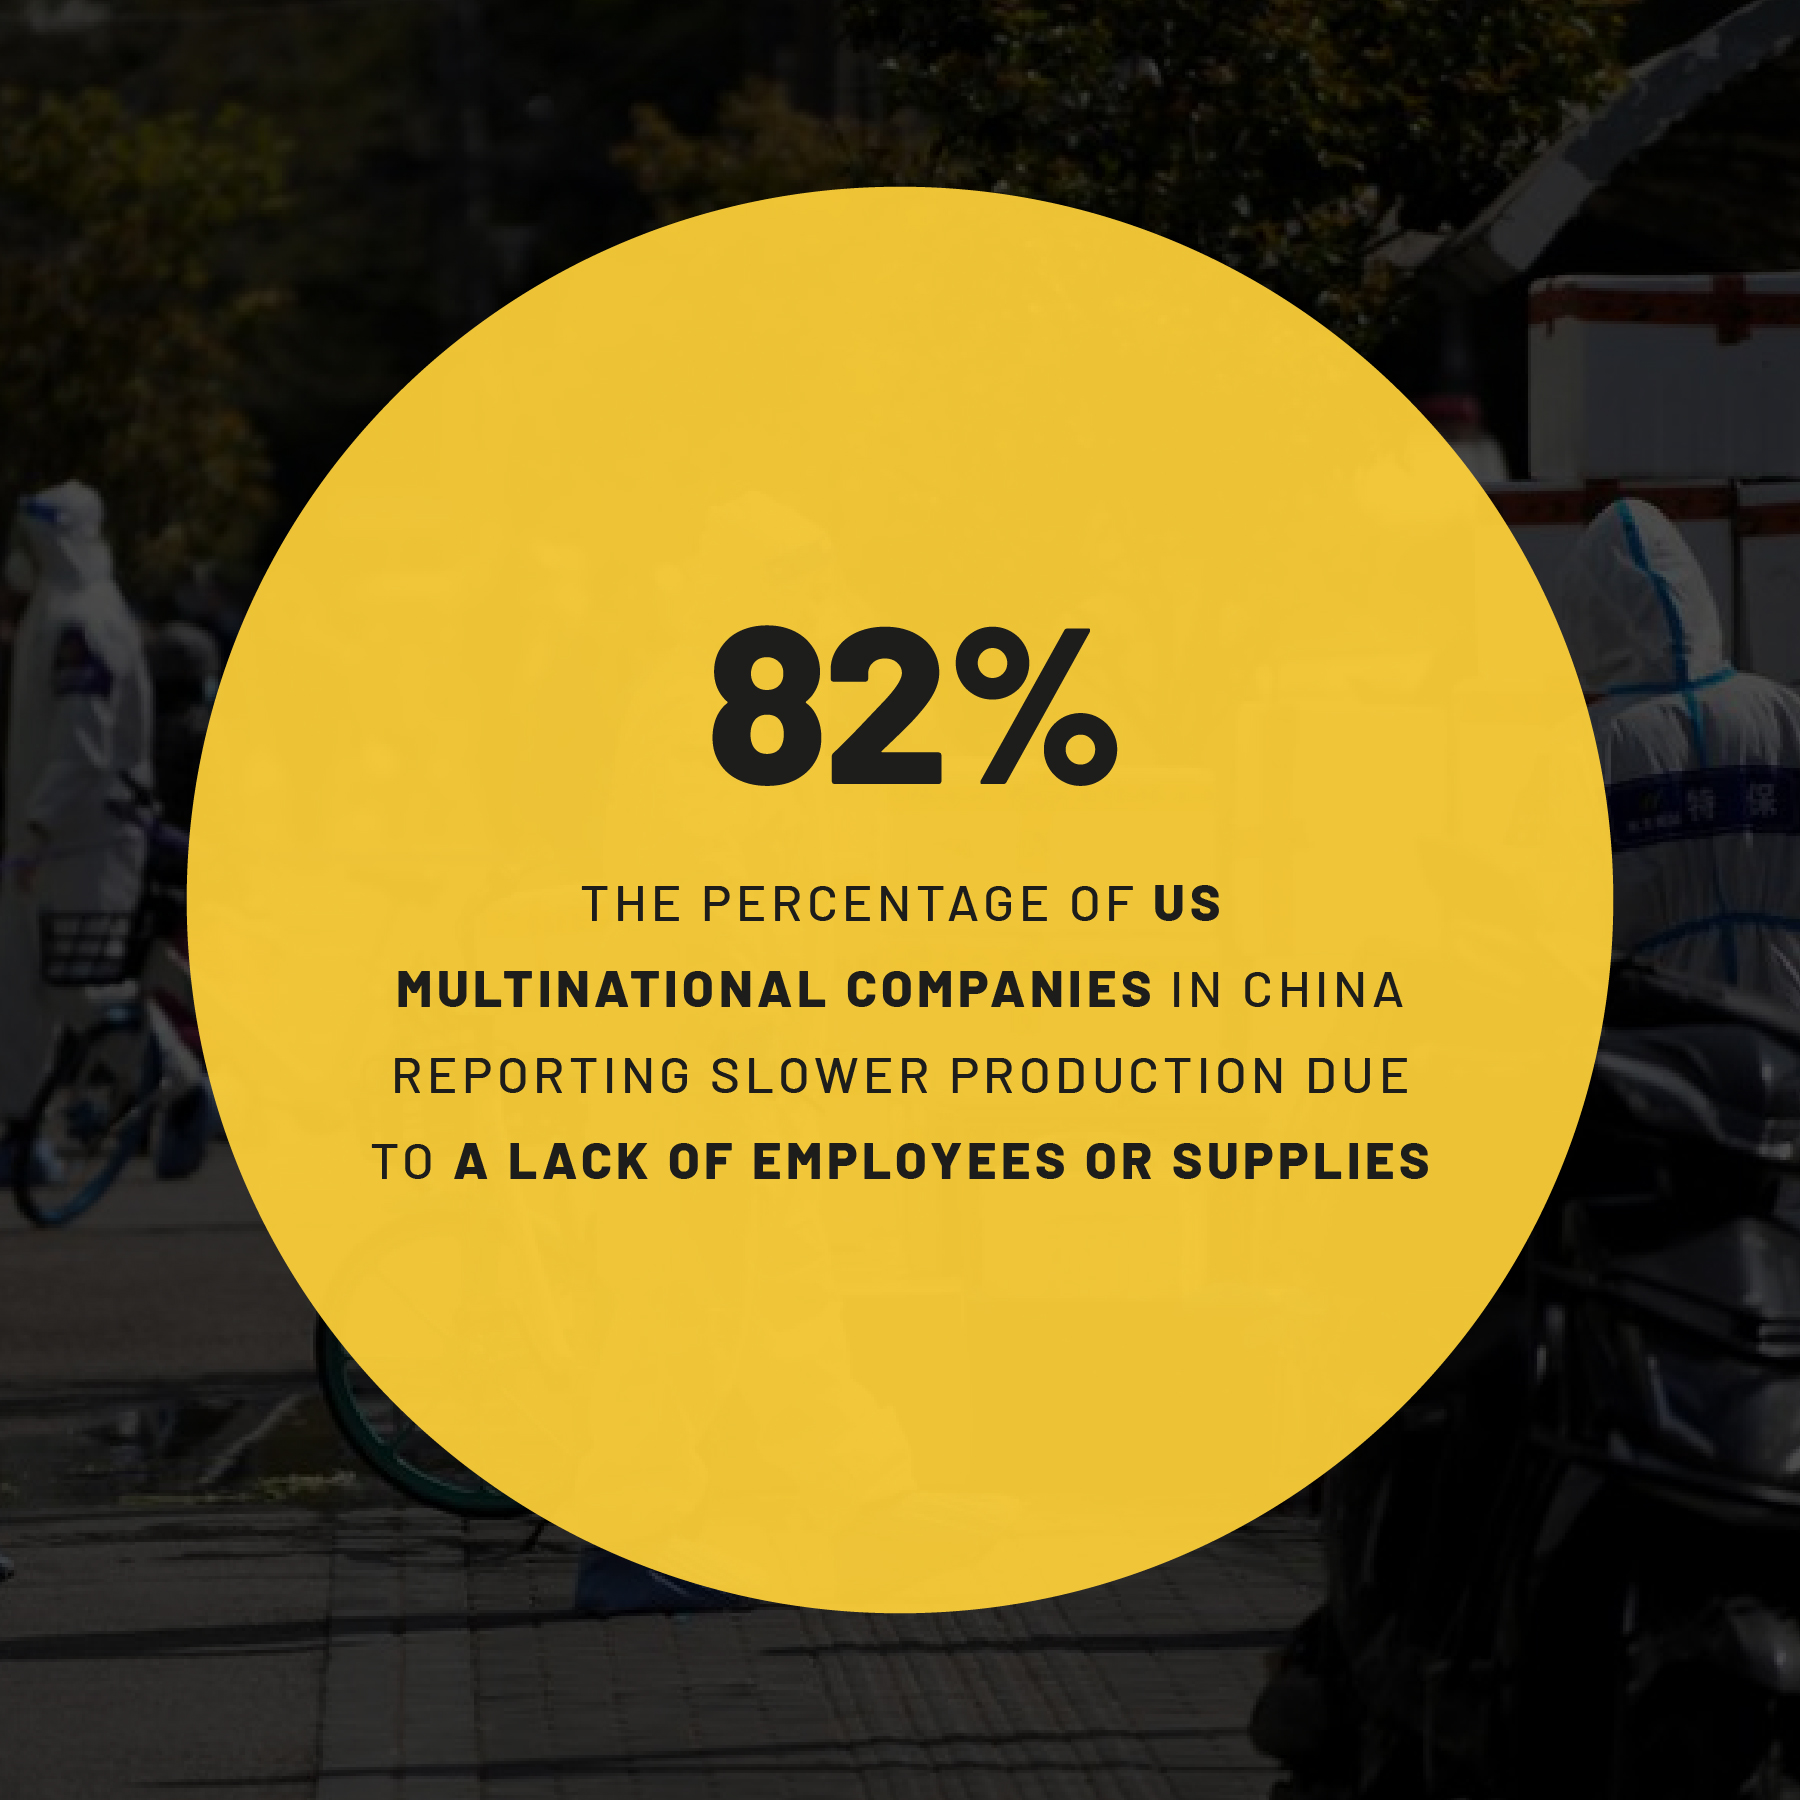 Infographic on The percentage of US multinational companies in China reporting slower production due to a lack of employees or supplies